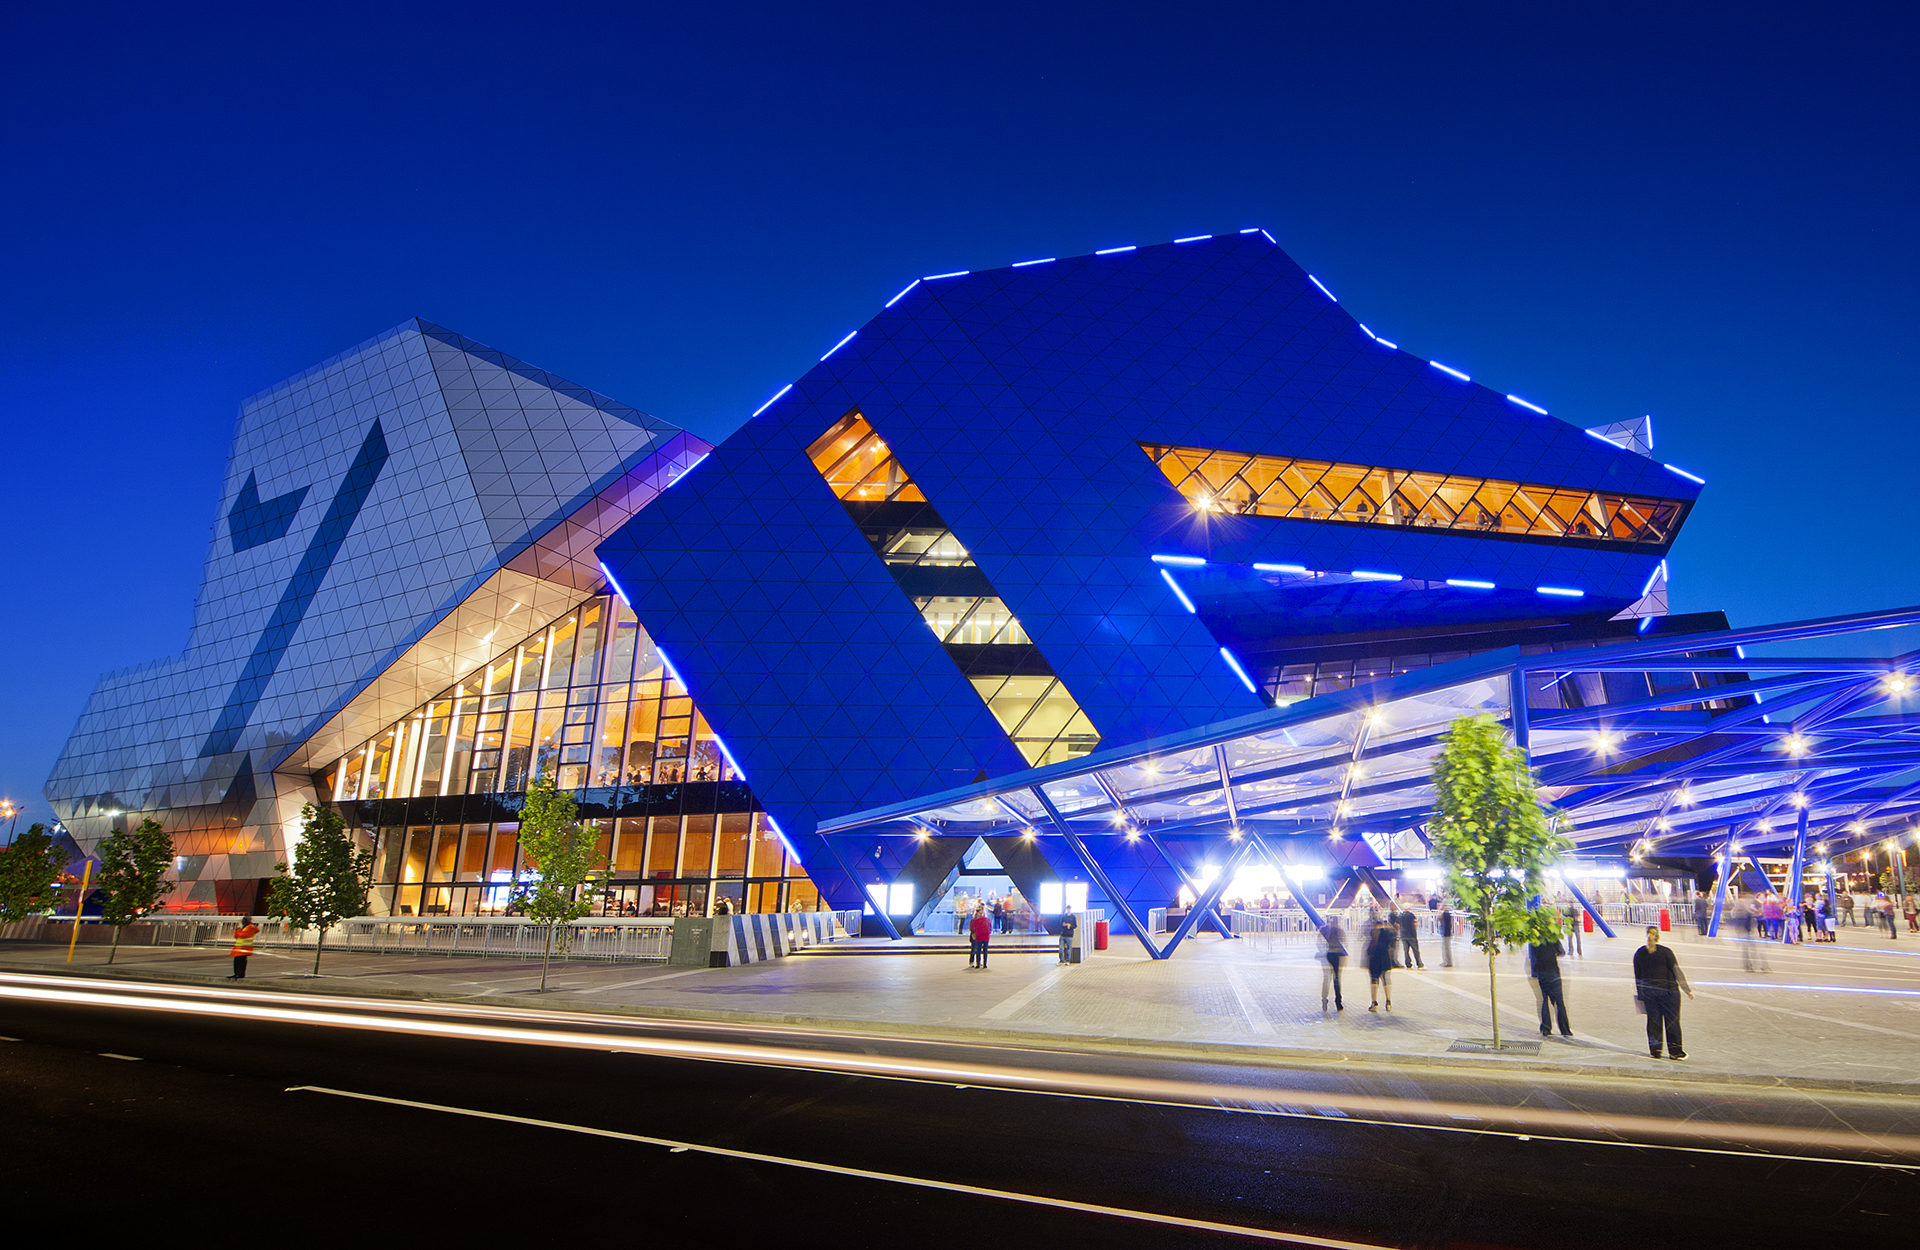 Name change for Perth Arena?